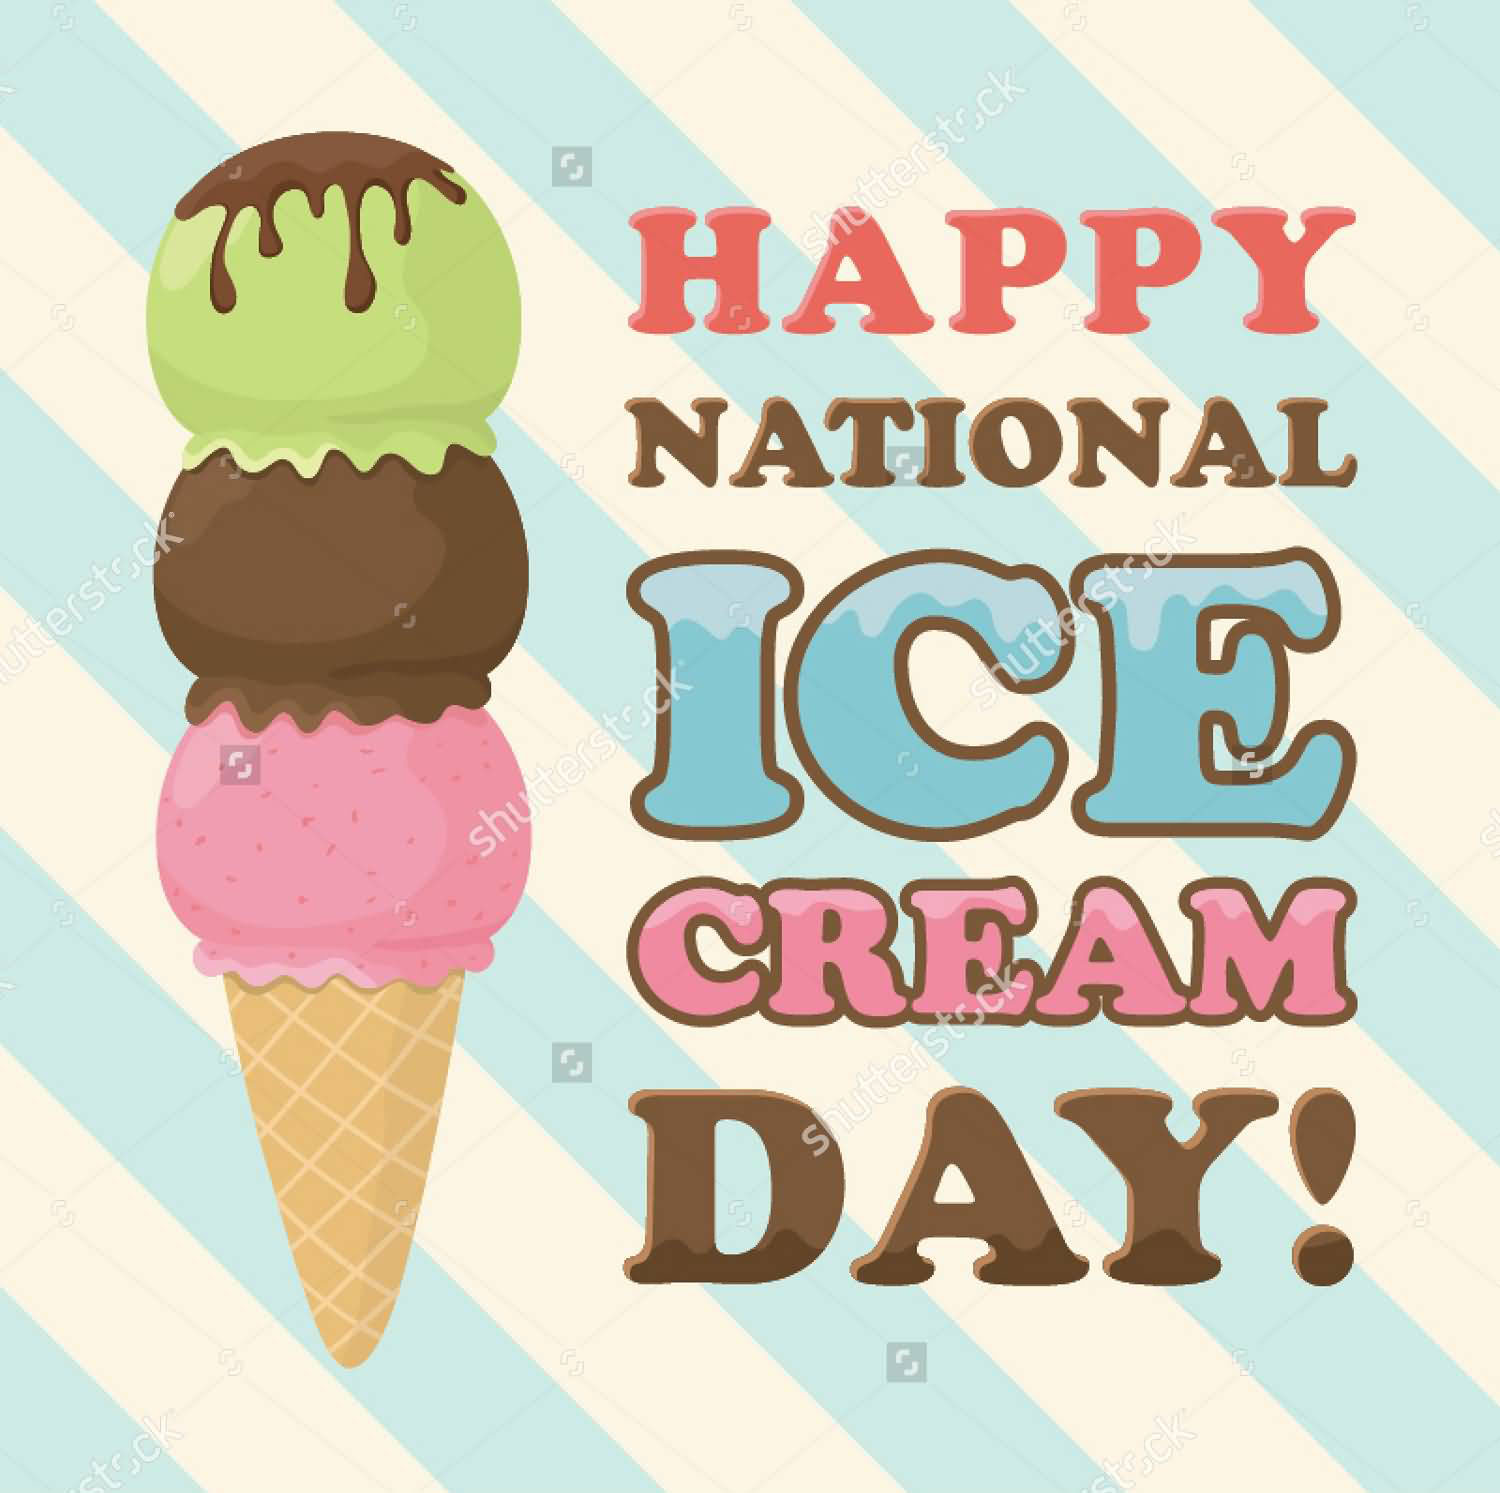 Happy National Ice Cream Day Wishes